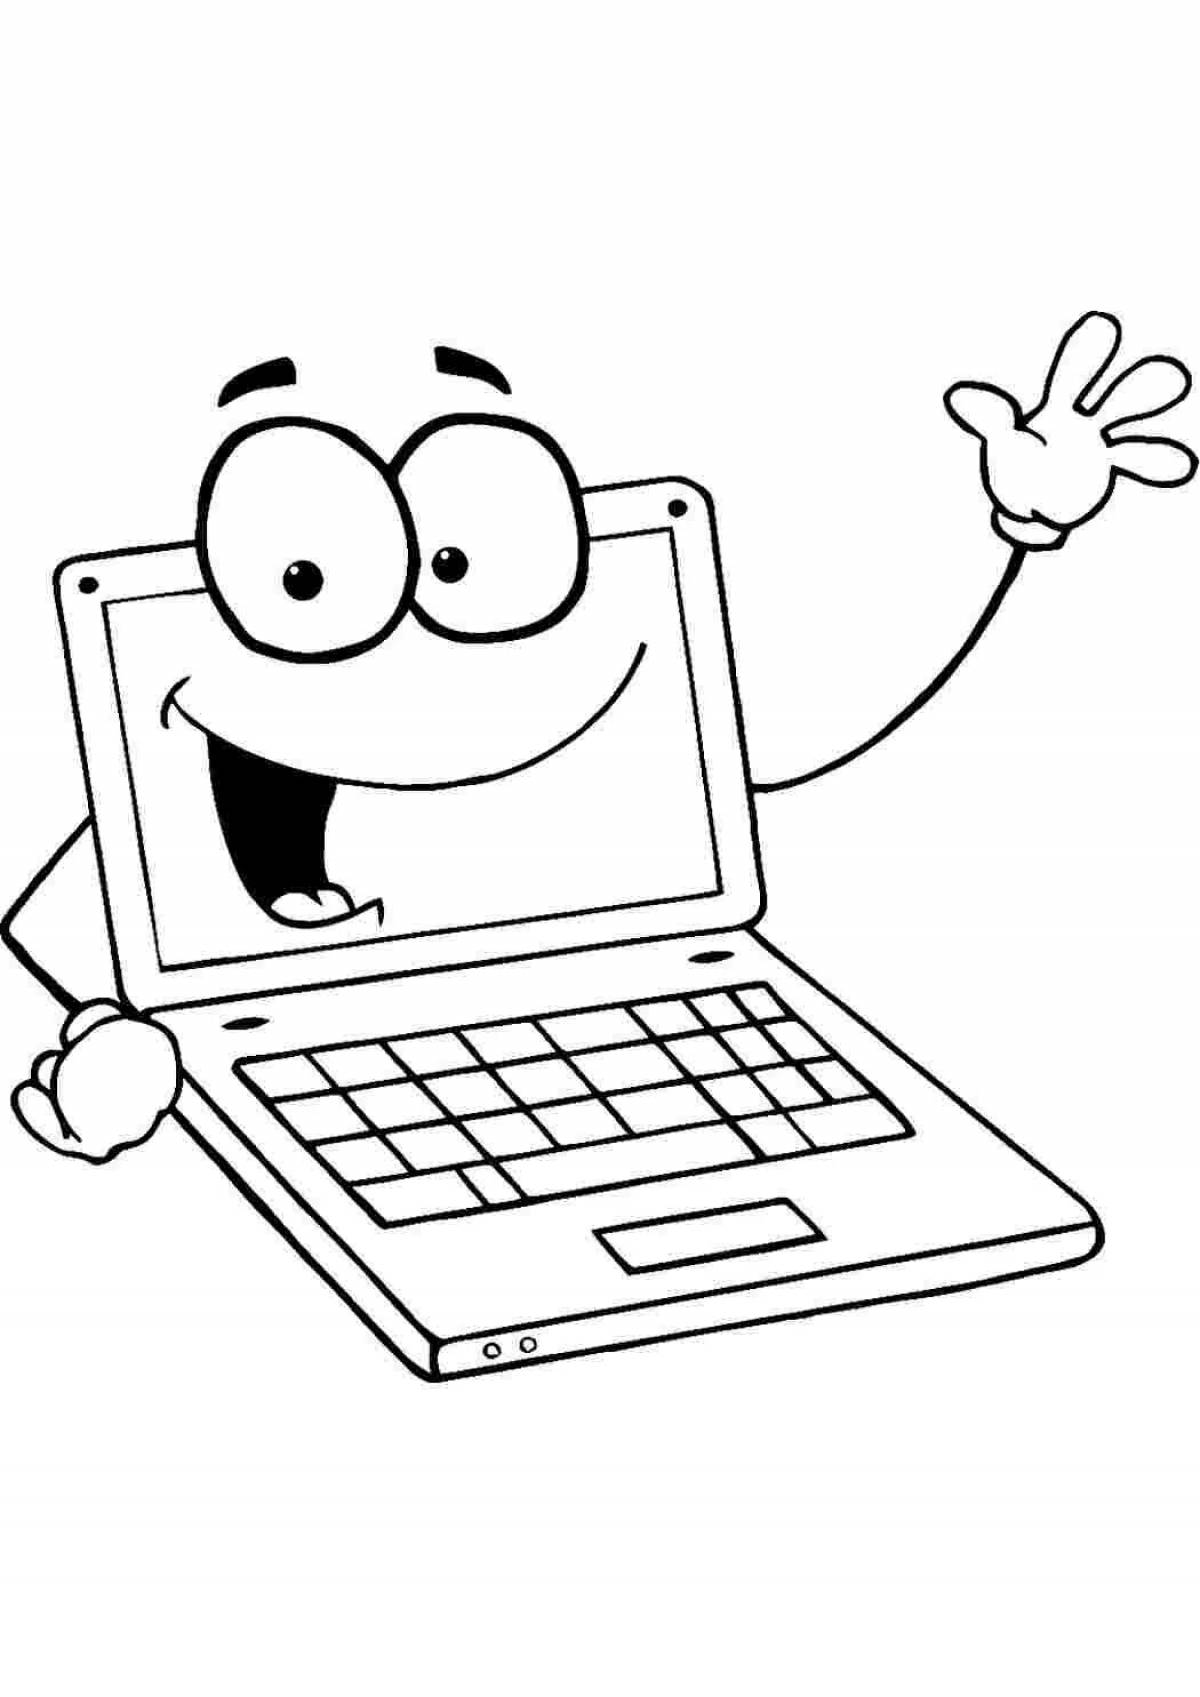 Color-luminous computer and phone coloring page